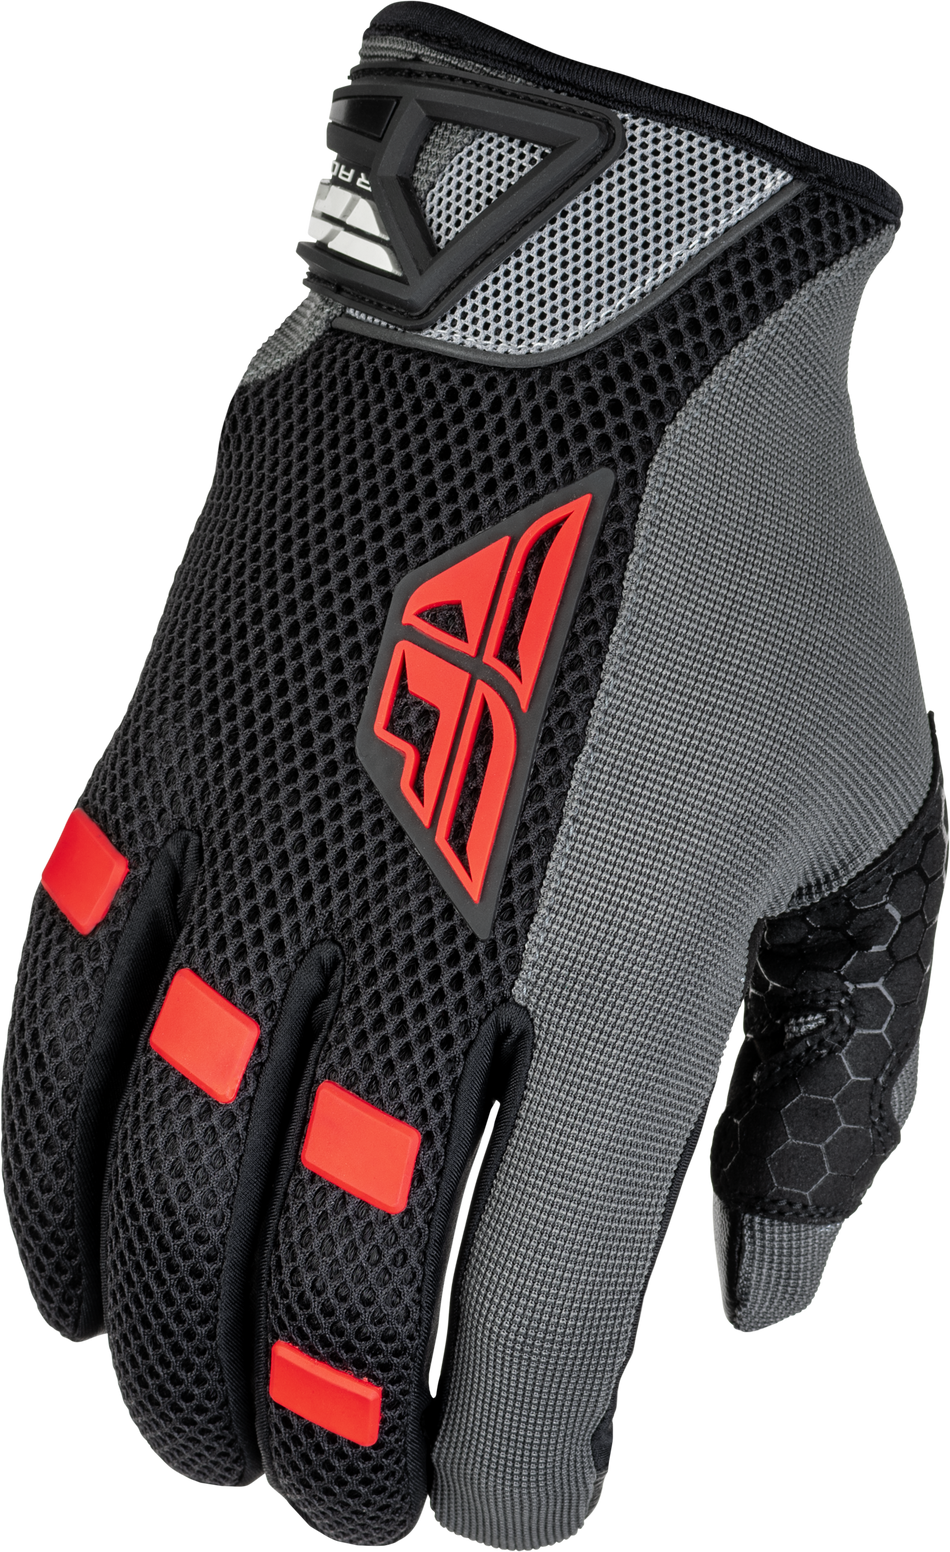 FLY RACING Coolpro Gloves Black/Red 3x 476-40263X